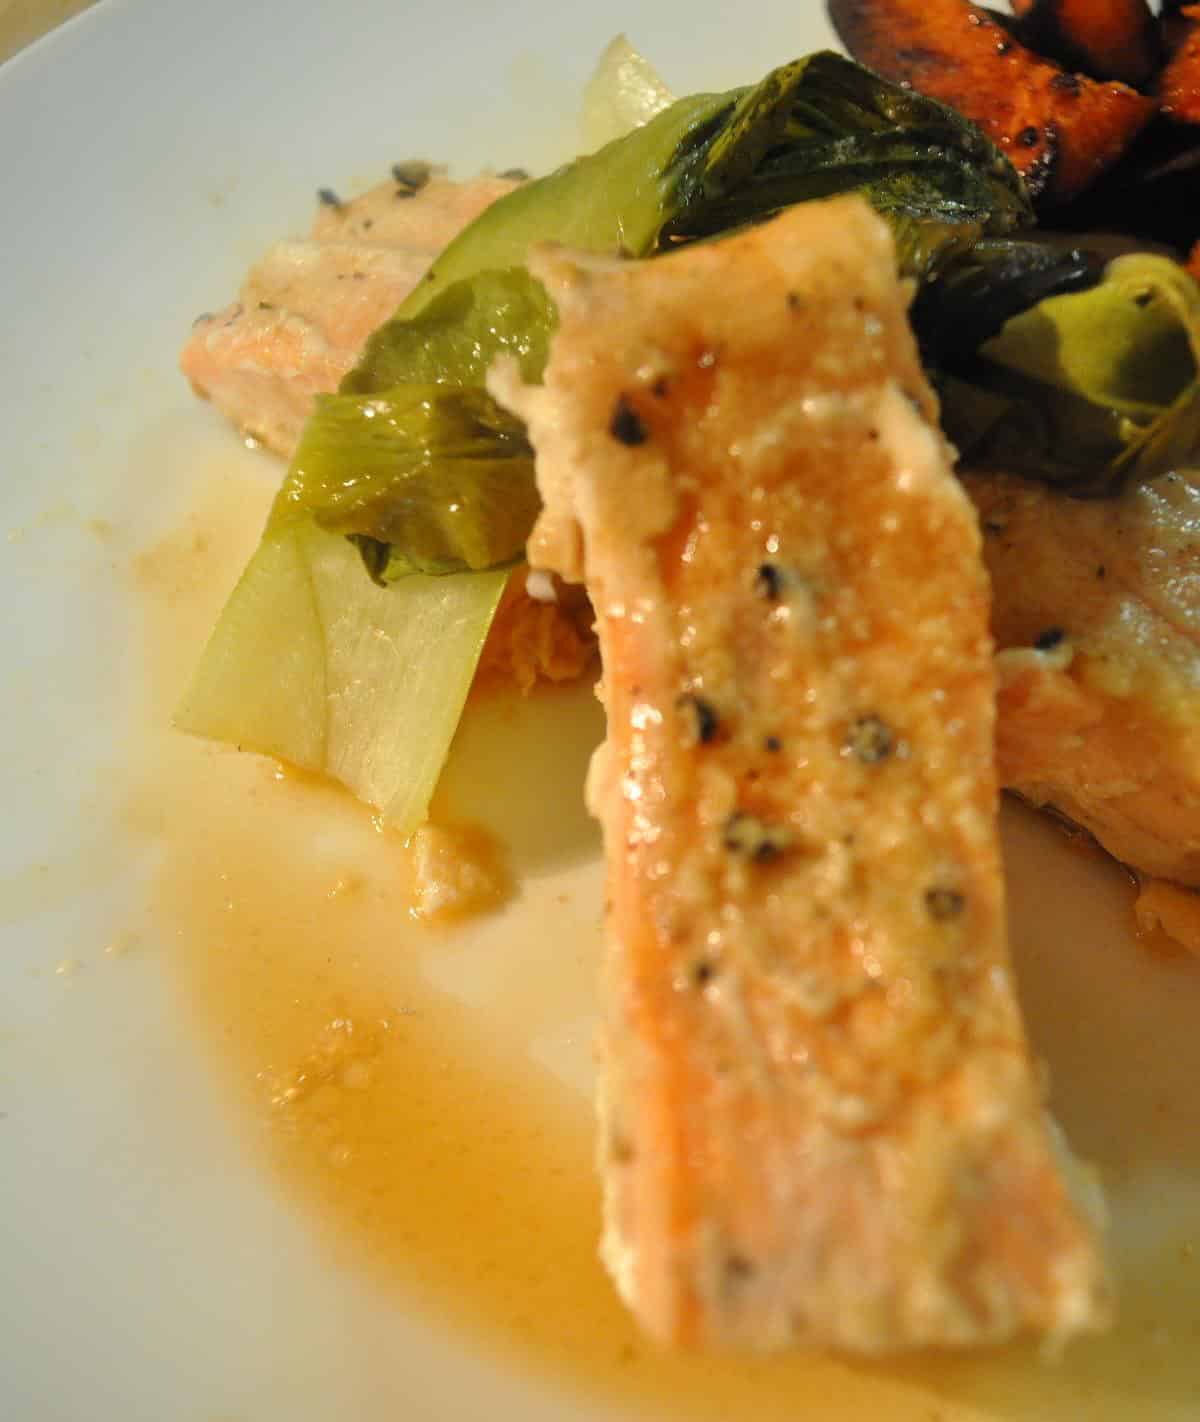  Flaky grilled salmon topped with crisp baby bok choy - the perfect pairing!